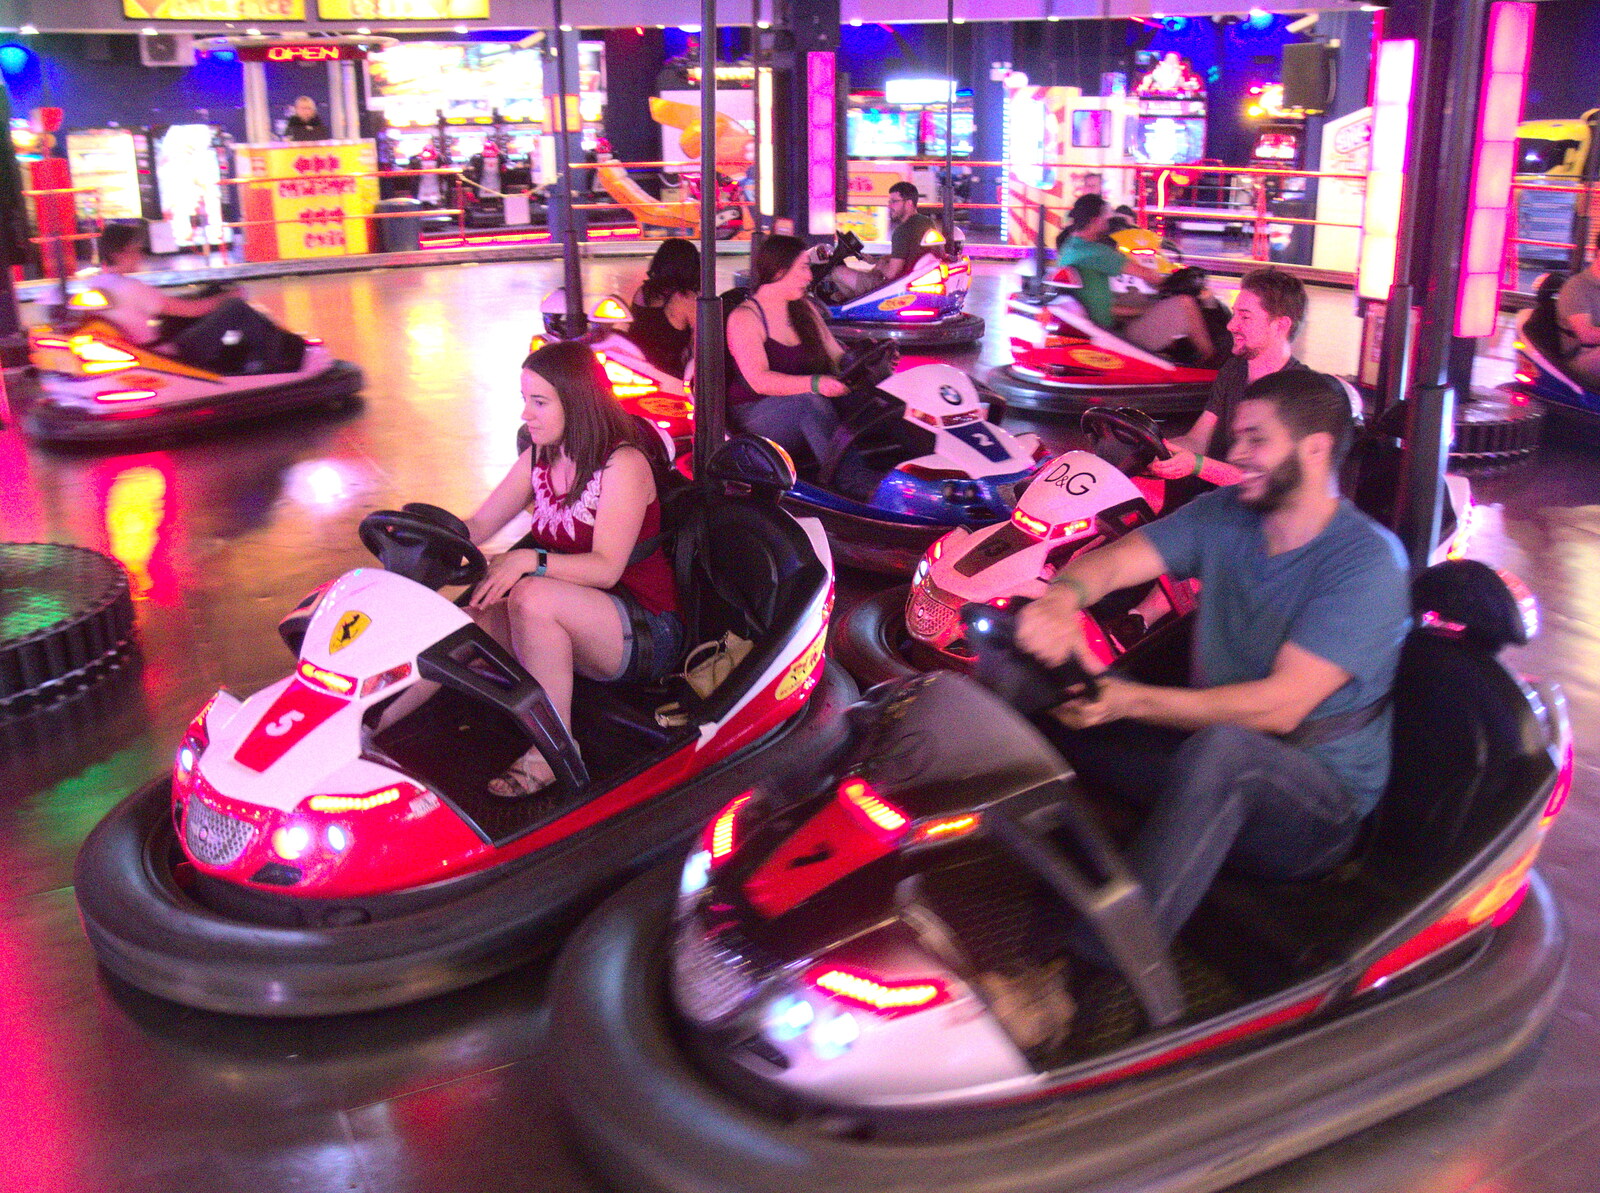 More bumper-car action from SwiftKey does Namco Funscape, Westminster, London - 20th June 2017